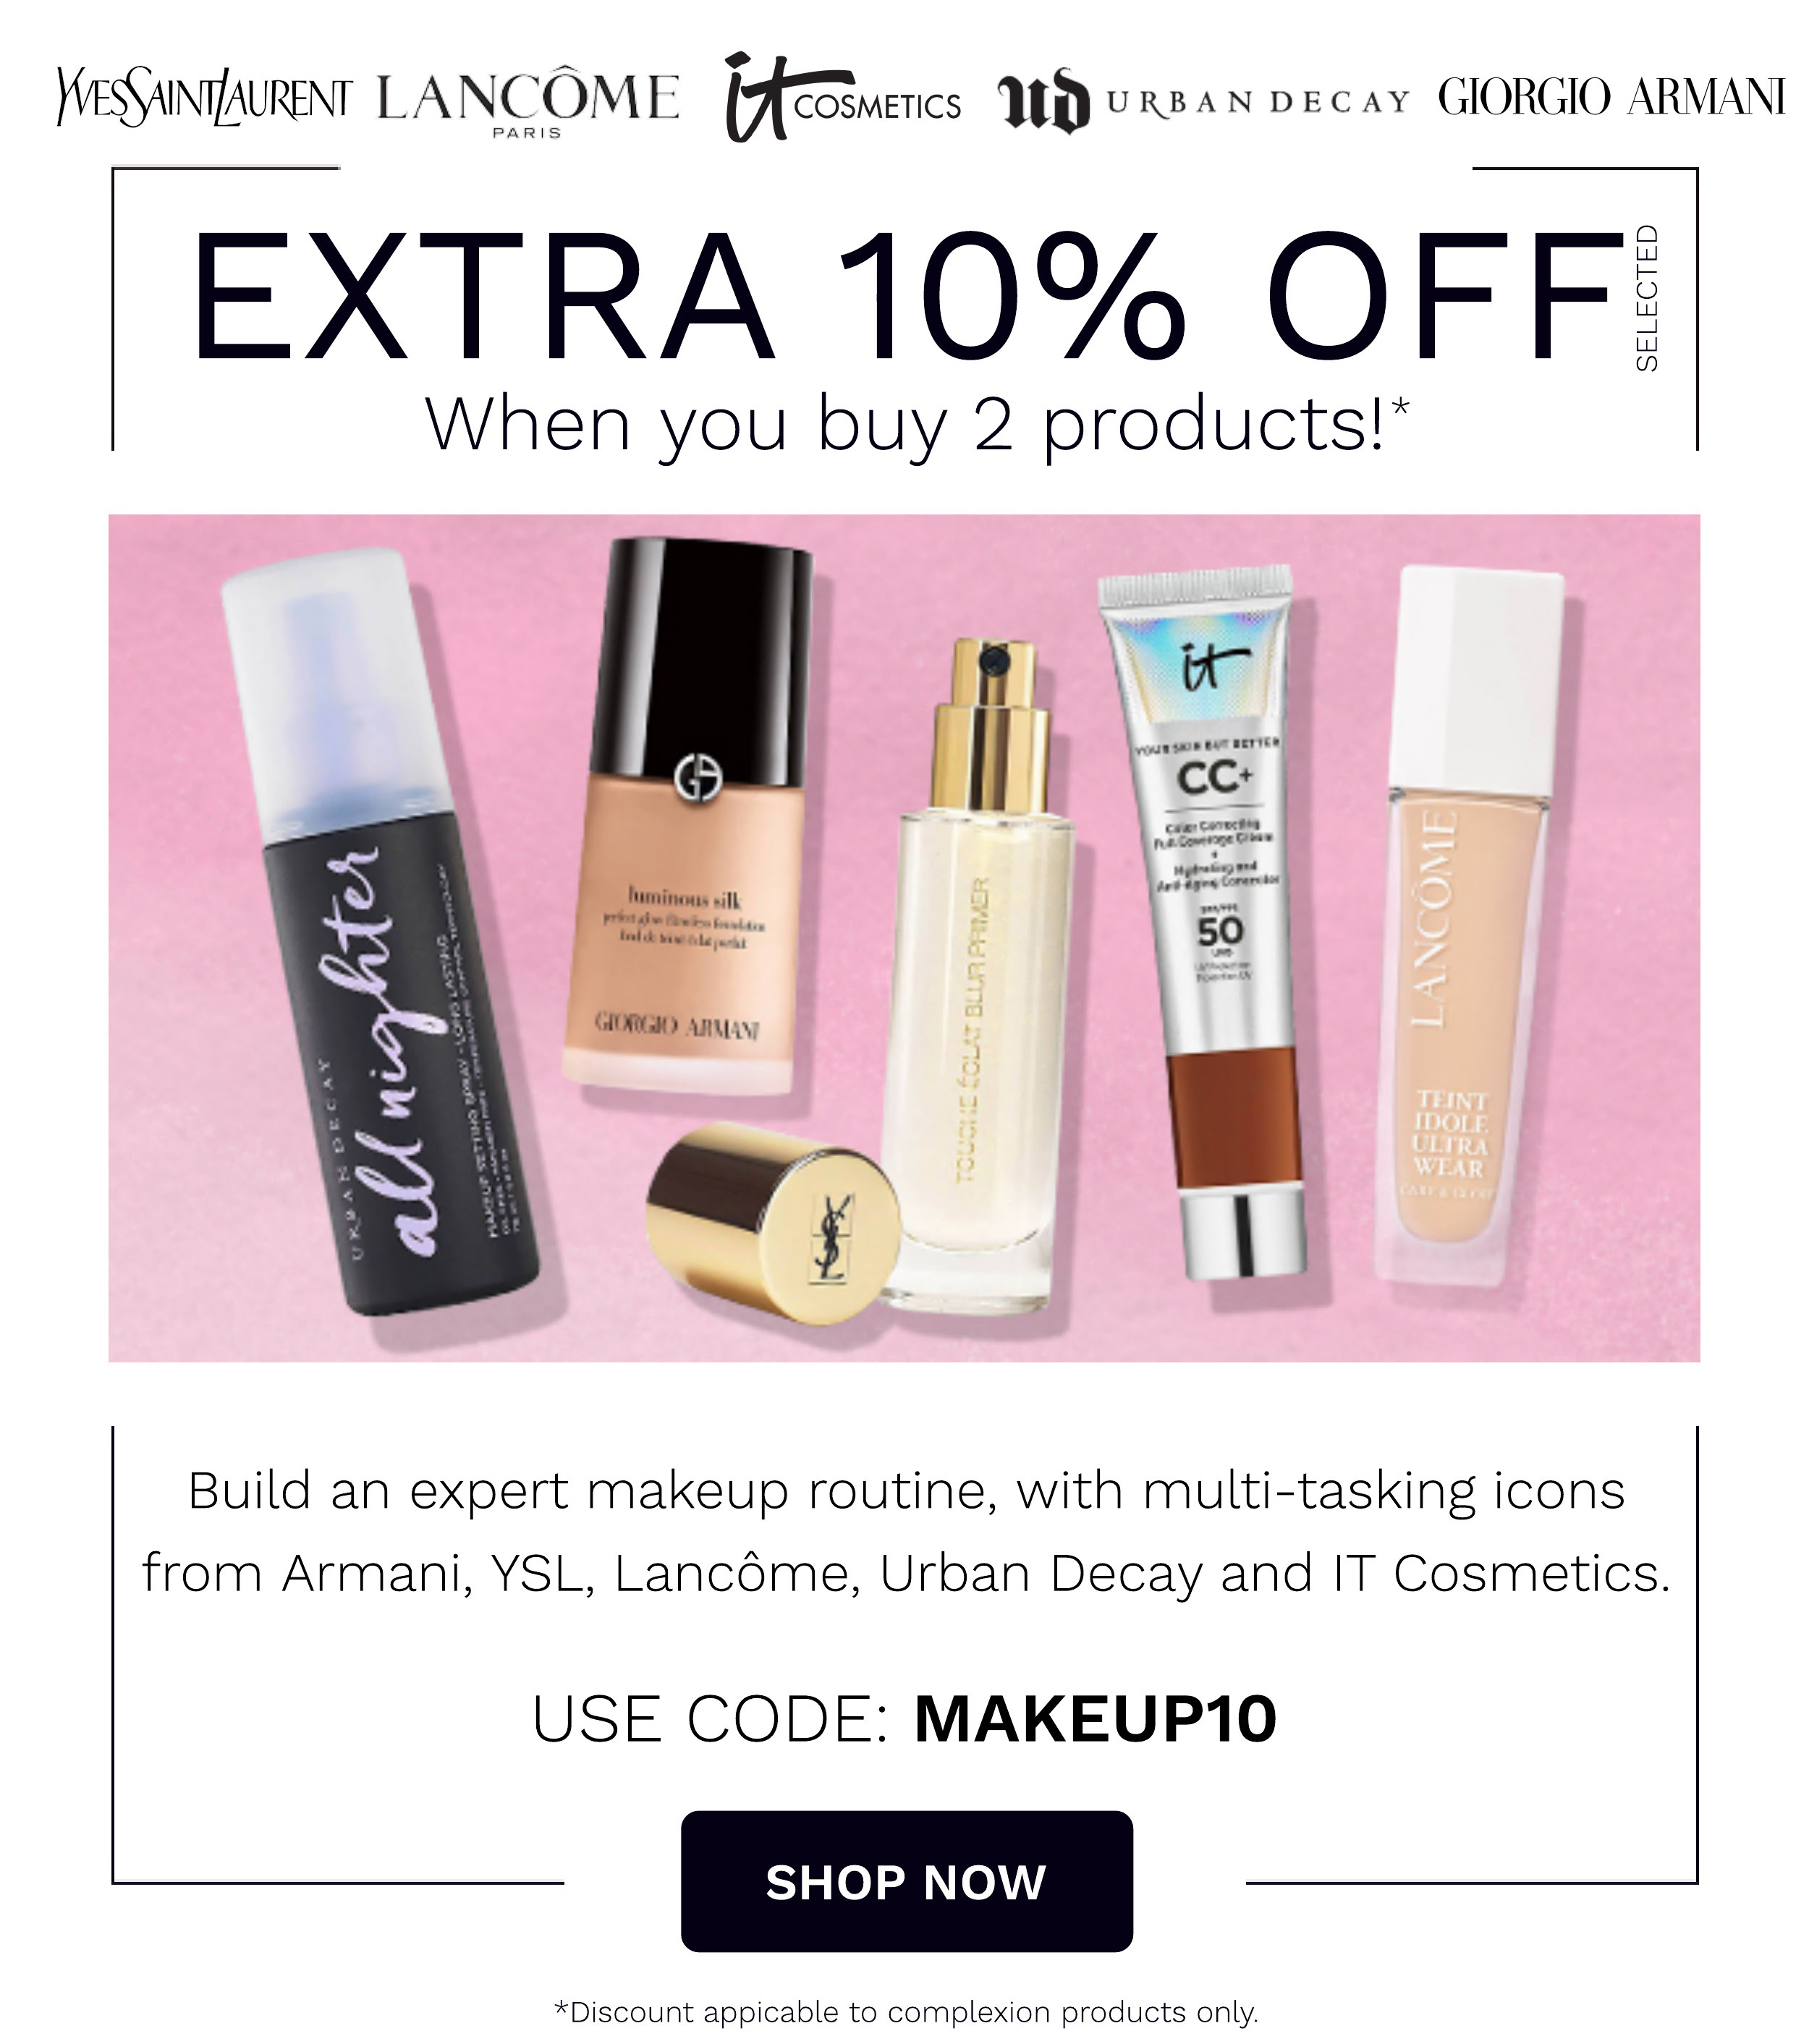 SAVE AN EXTRA 10 PERCENT WHEN YOU BUY TWO OR MORE